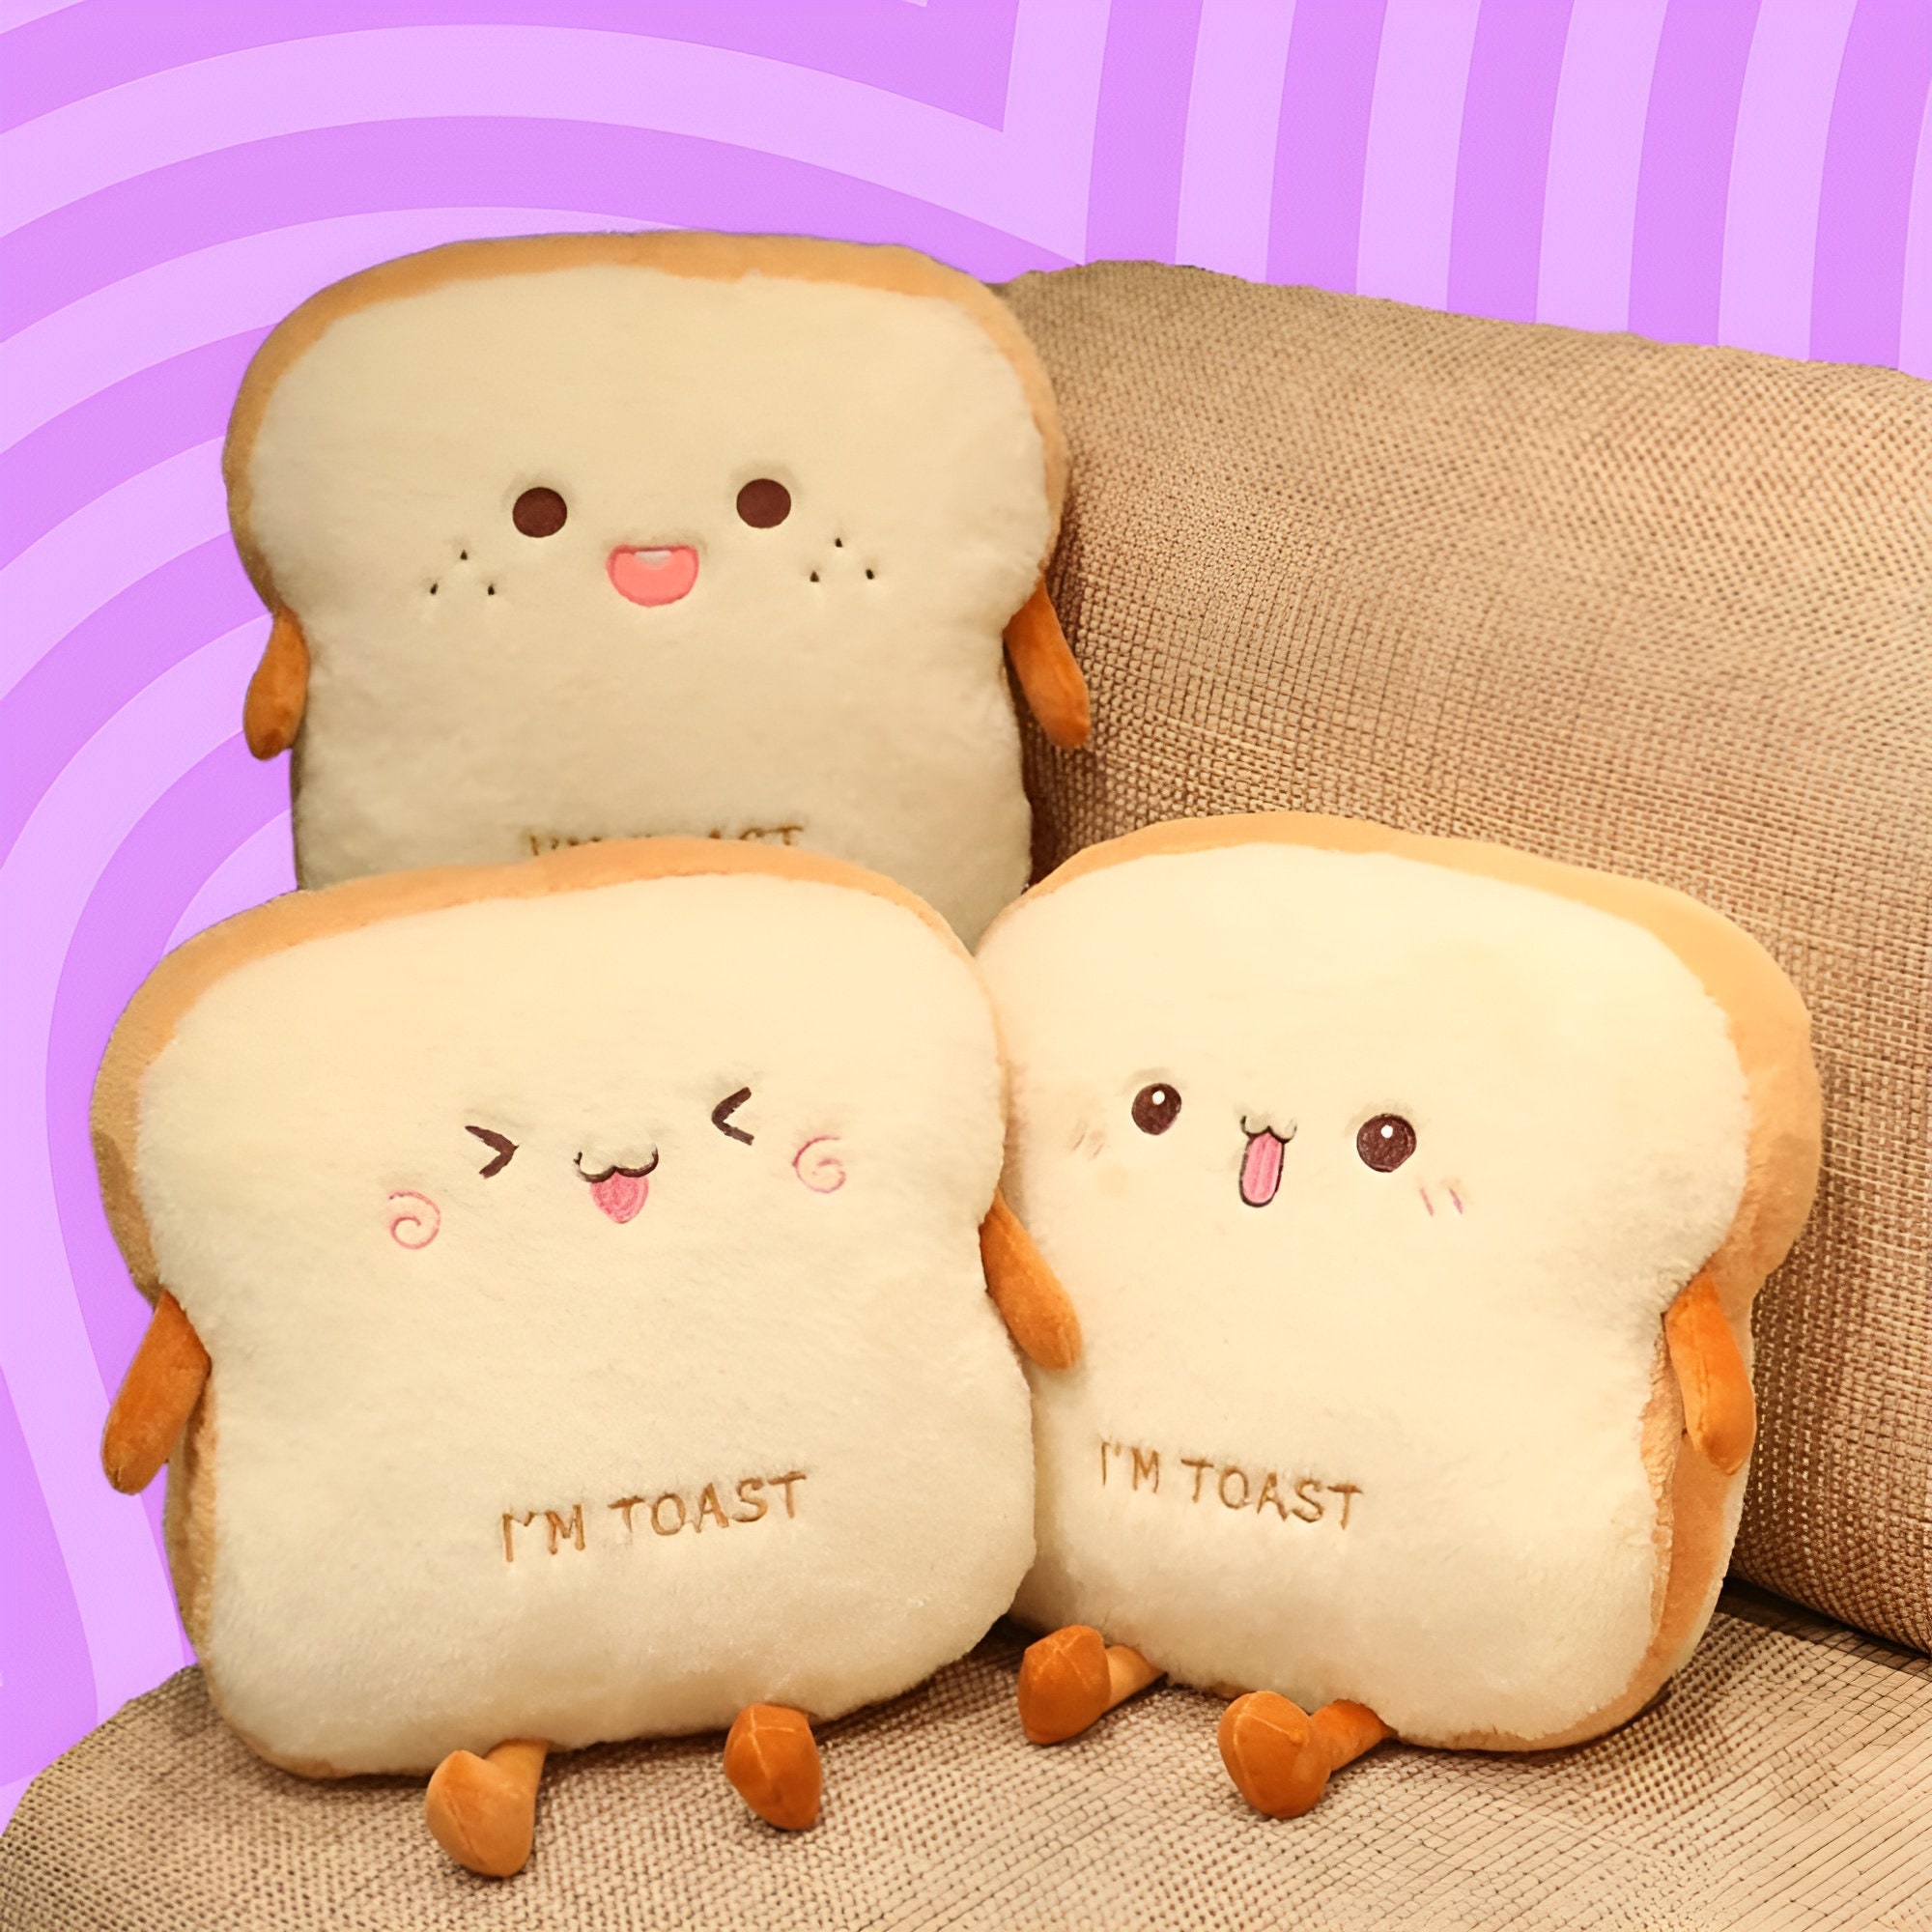 Bread Toast Cushion Chair Pad Decoration Memory Stuffed PP Food Pillow Seat Cushion for Bedroom Restaurant Valentine Adults Kids B, Size